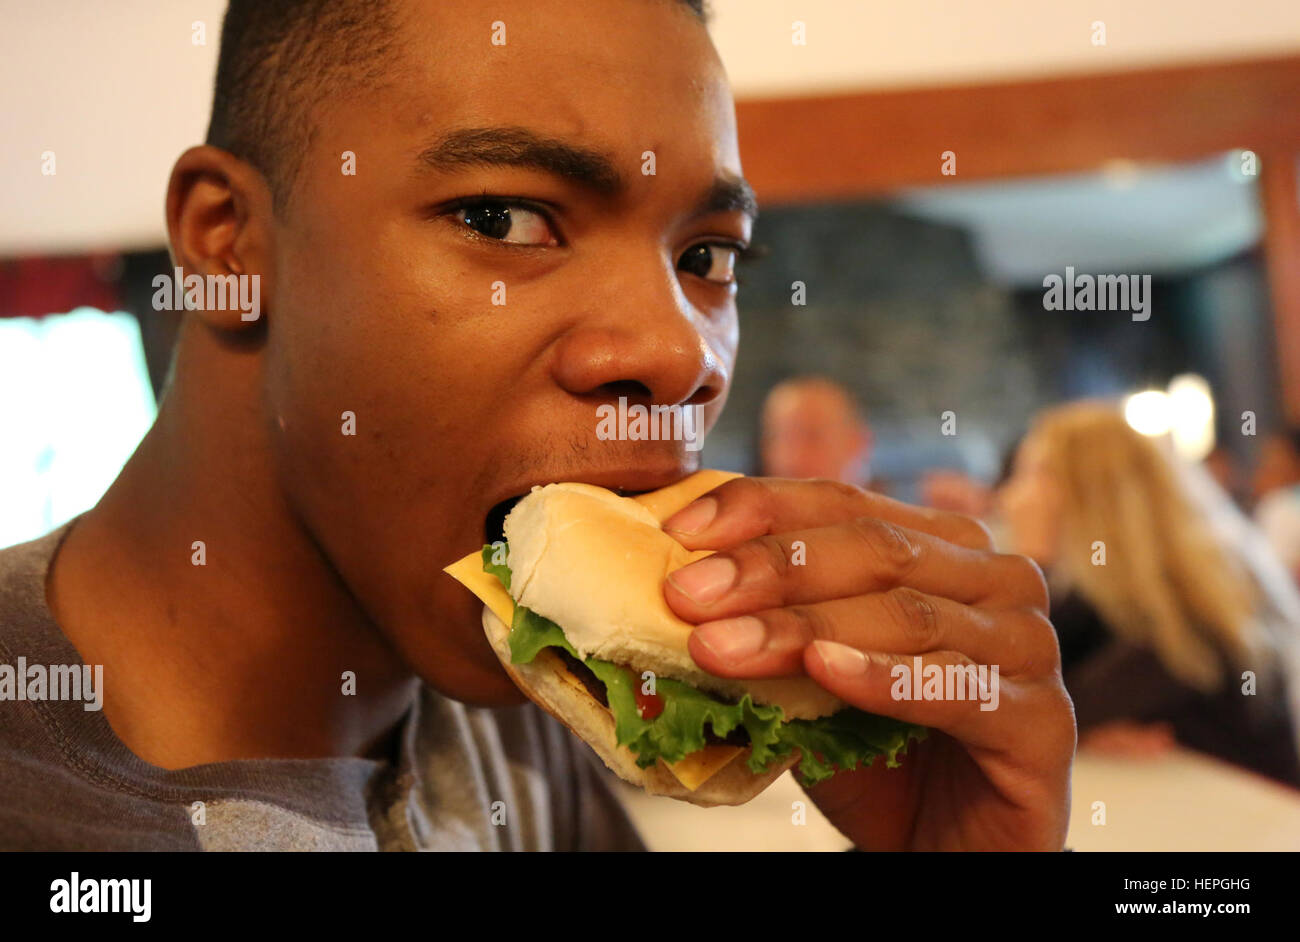 U.S. Army Pvt. Khalil Sinclair, assigned to 55th Signal Company (Combat Camera), eats a burger during a unit picnic at Burba Lake Cottage on Fort George G. Meade, Md., July 2, 2015. The unit held the picnic to celebrate the Independence Day holiday and build esprit de corps. (U.S. Army photo by Pfc. Brittany Dempsey/Released) 55 th Signal Company (Combat Camera) FRG Company Picnic 150702-A-IP716-310 Stock Photo